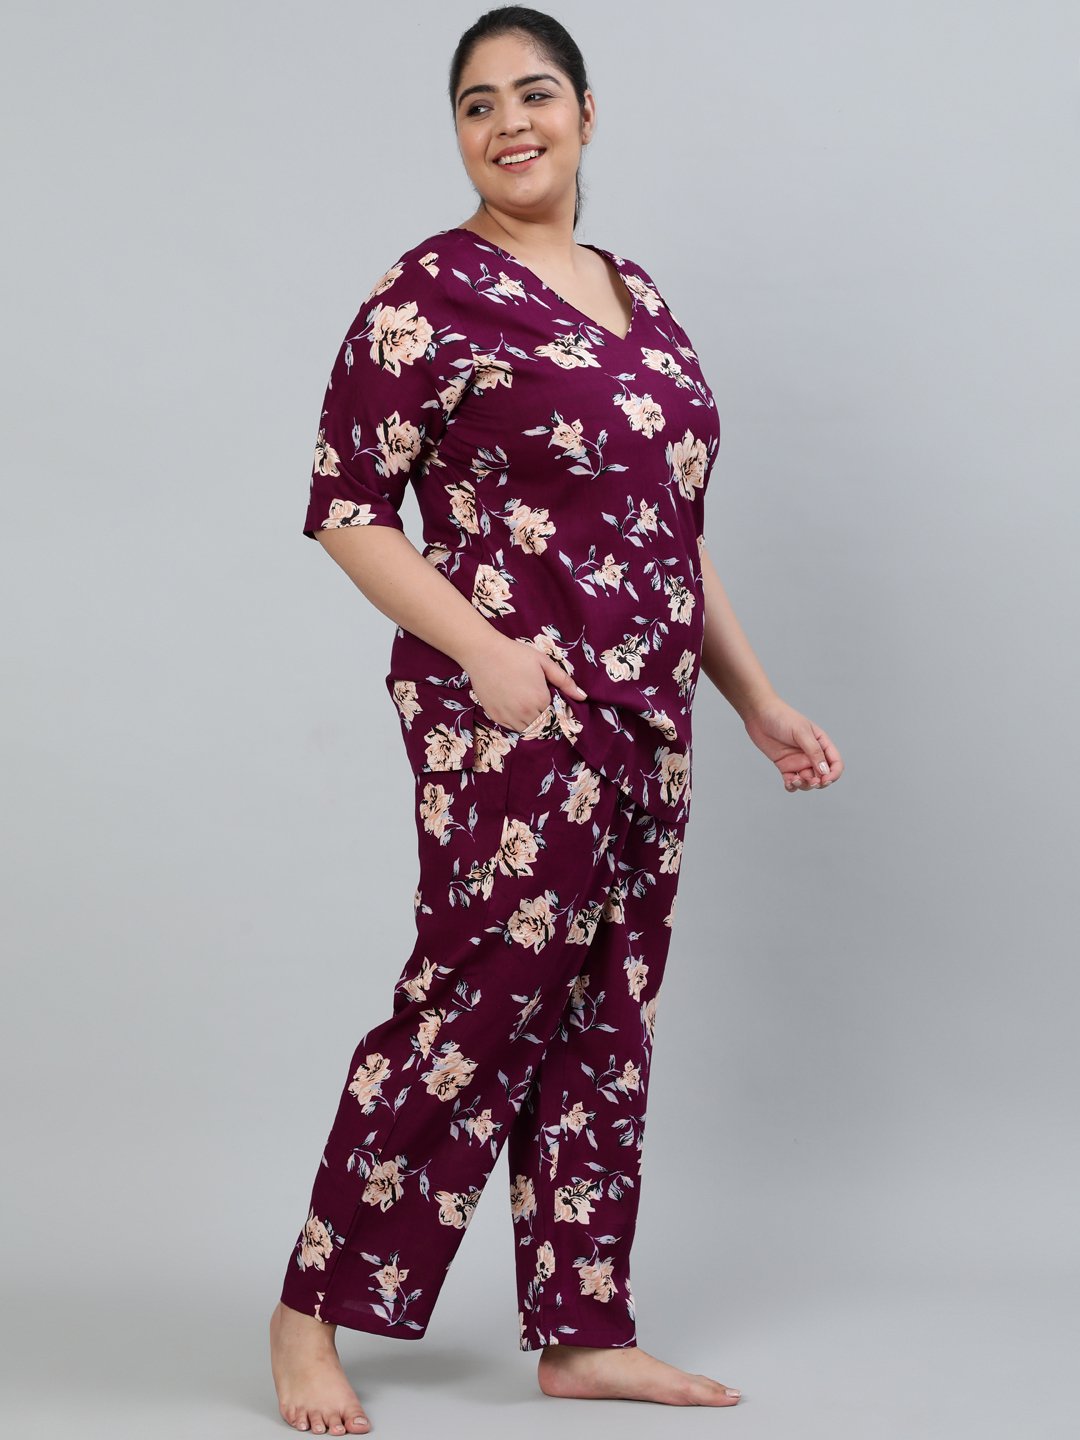 Black Color Leaf Print With Floral Printed Viscose Rayon Nightsuit For –  Claura Designs Pvt. Ltd.